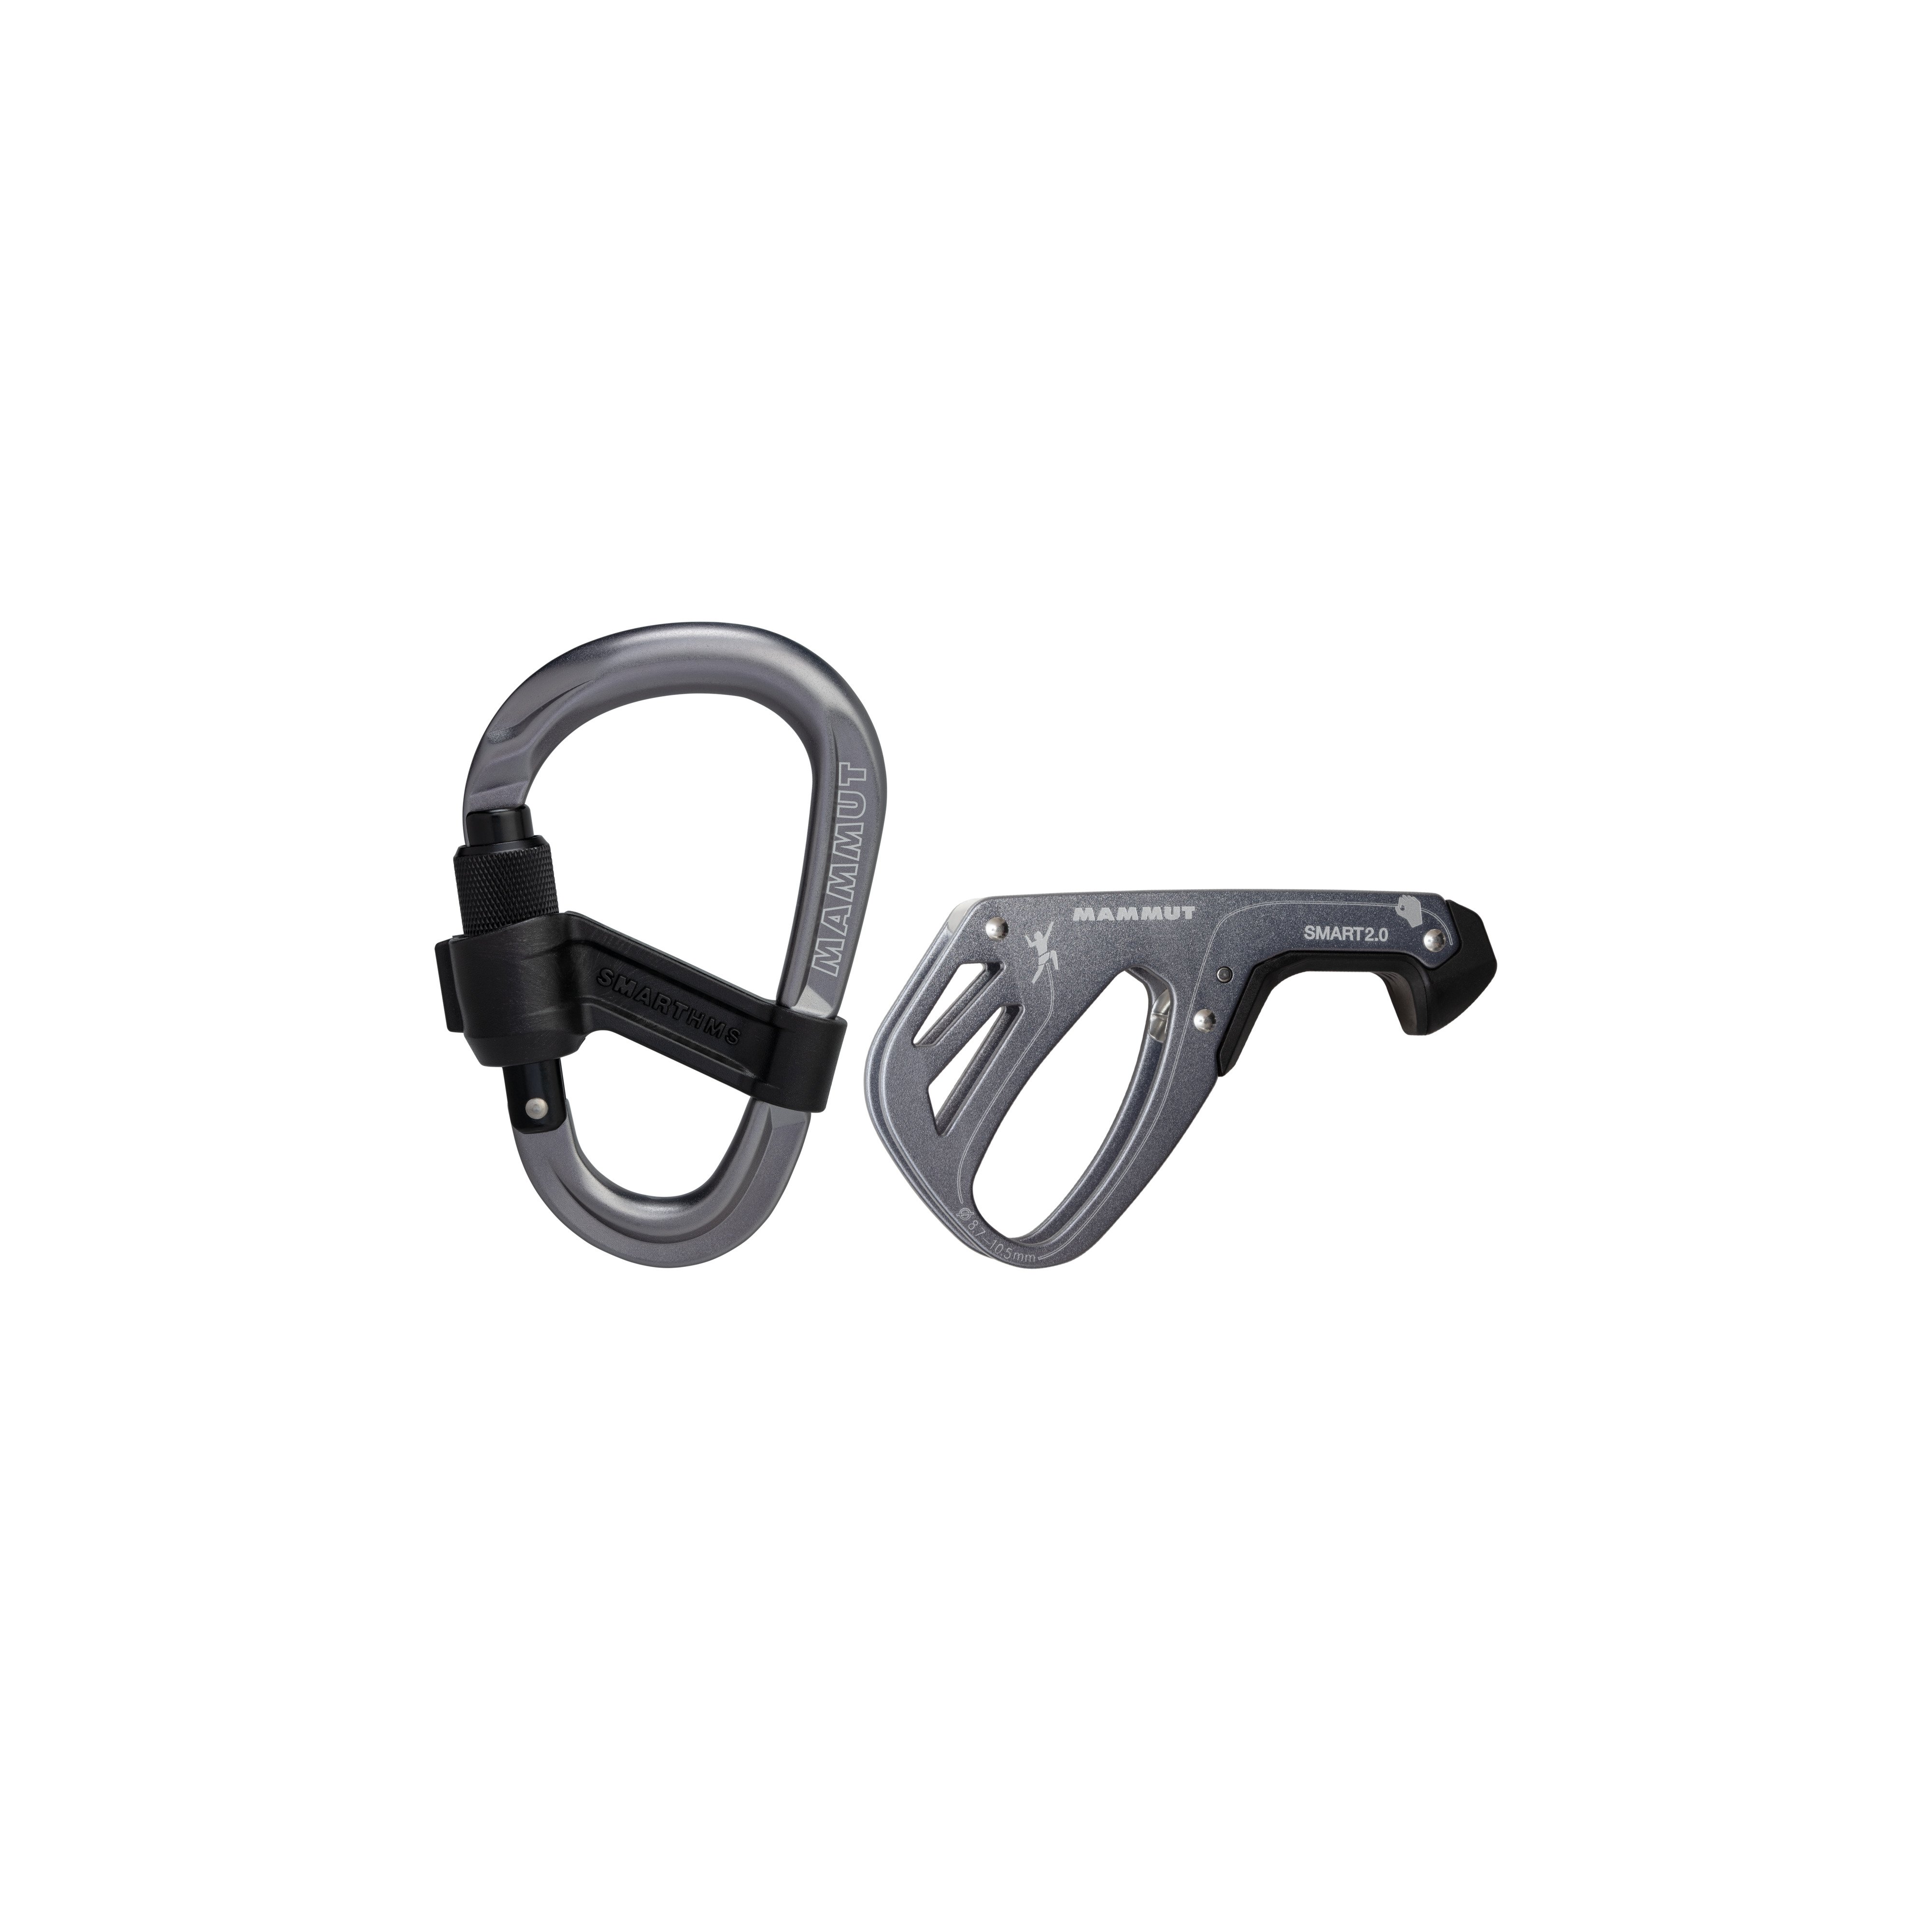 Smart 2.0 Belay Package - grey, one size product image